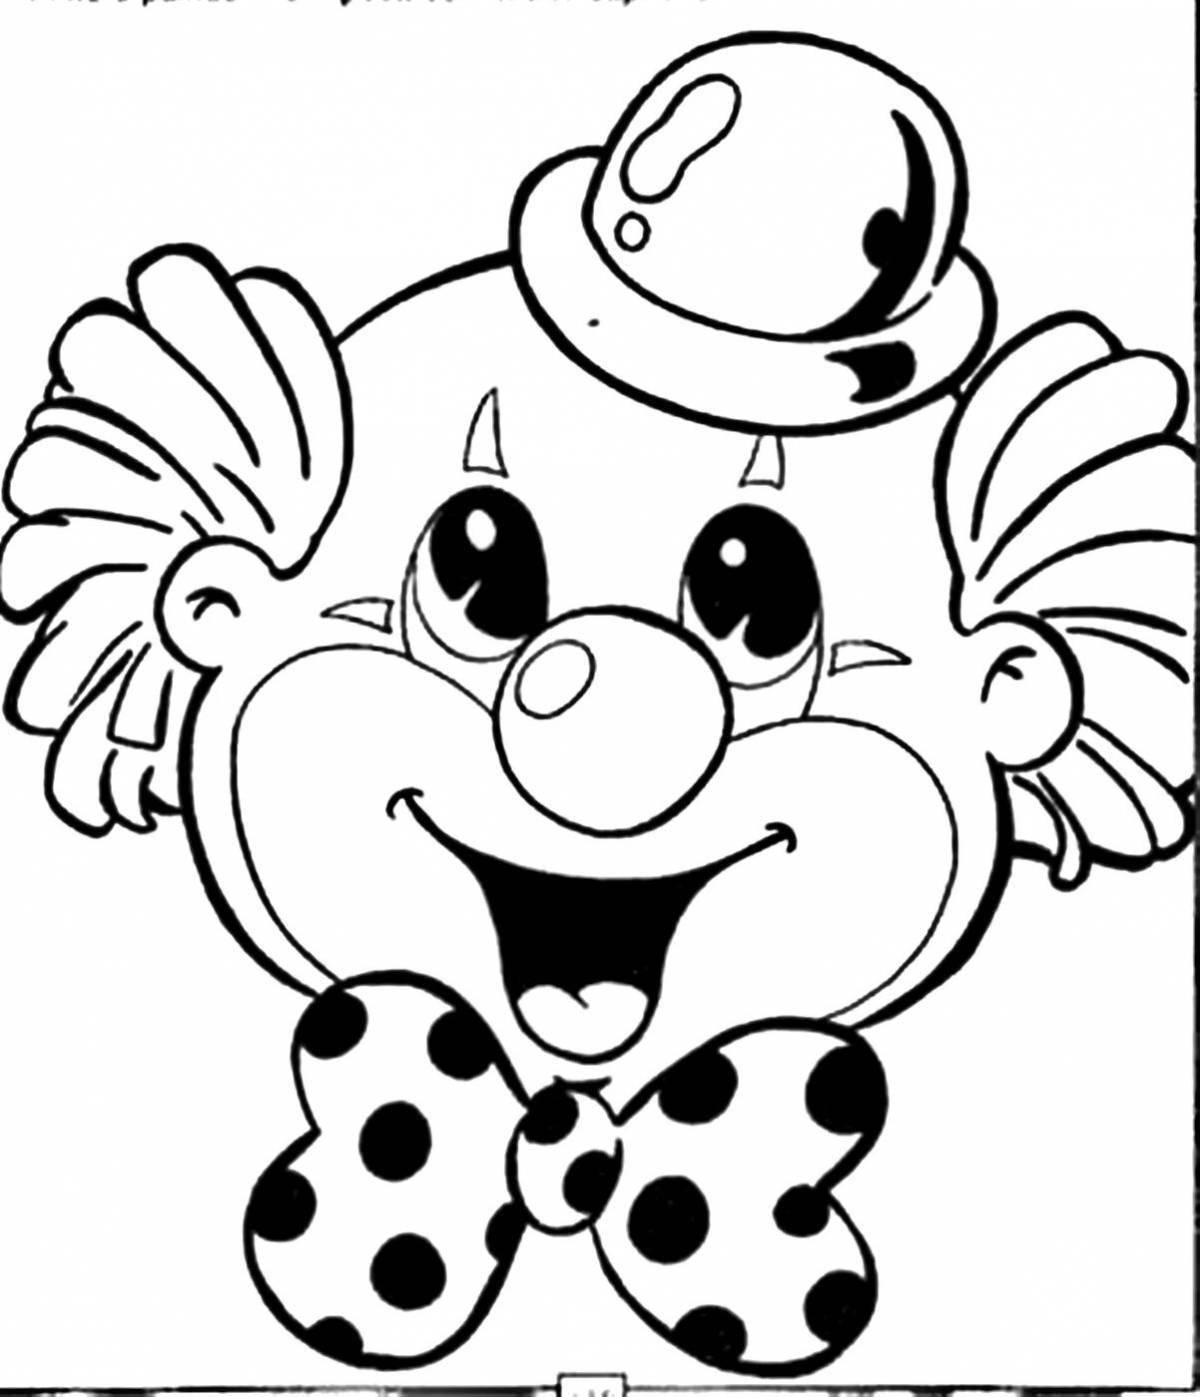 Playful clown head coloring page